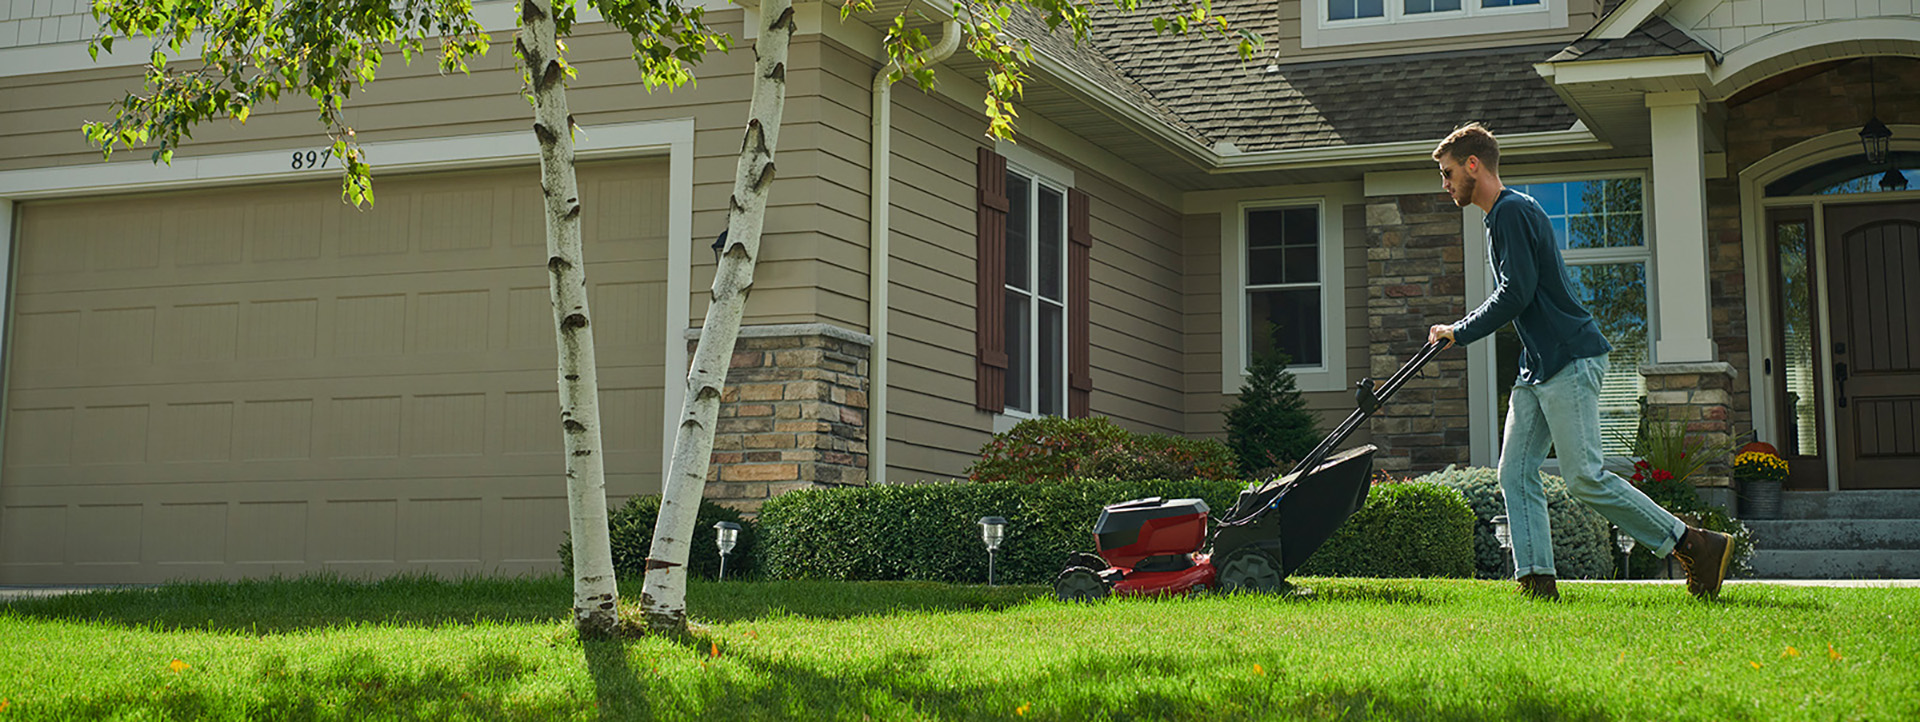 Man mowing the front yard of house with a Toro mower